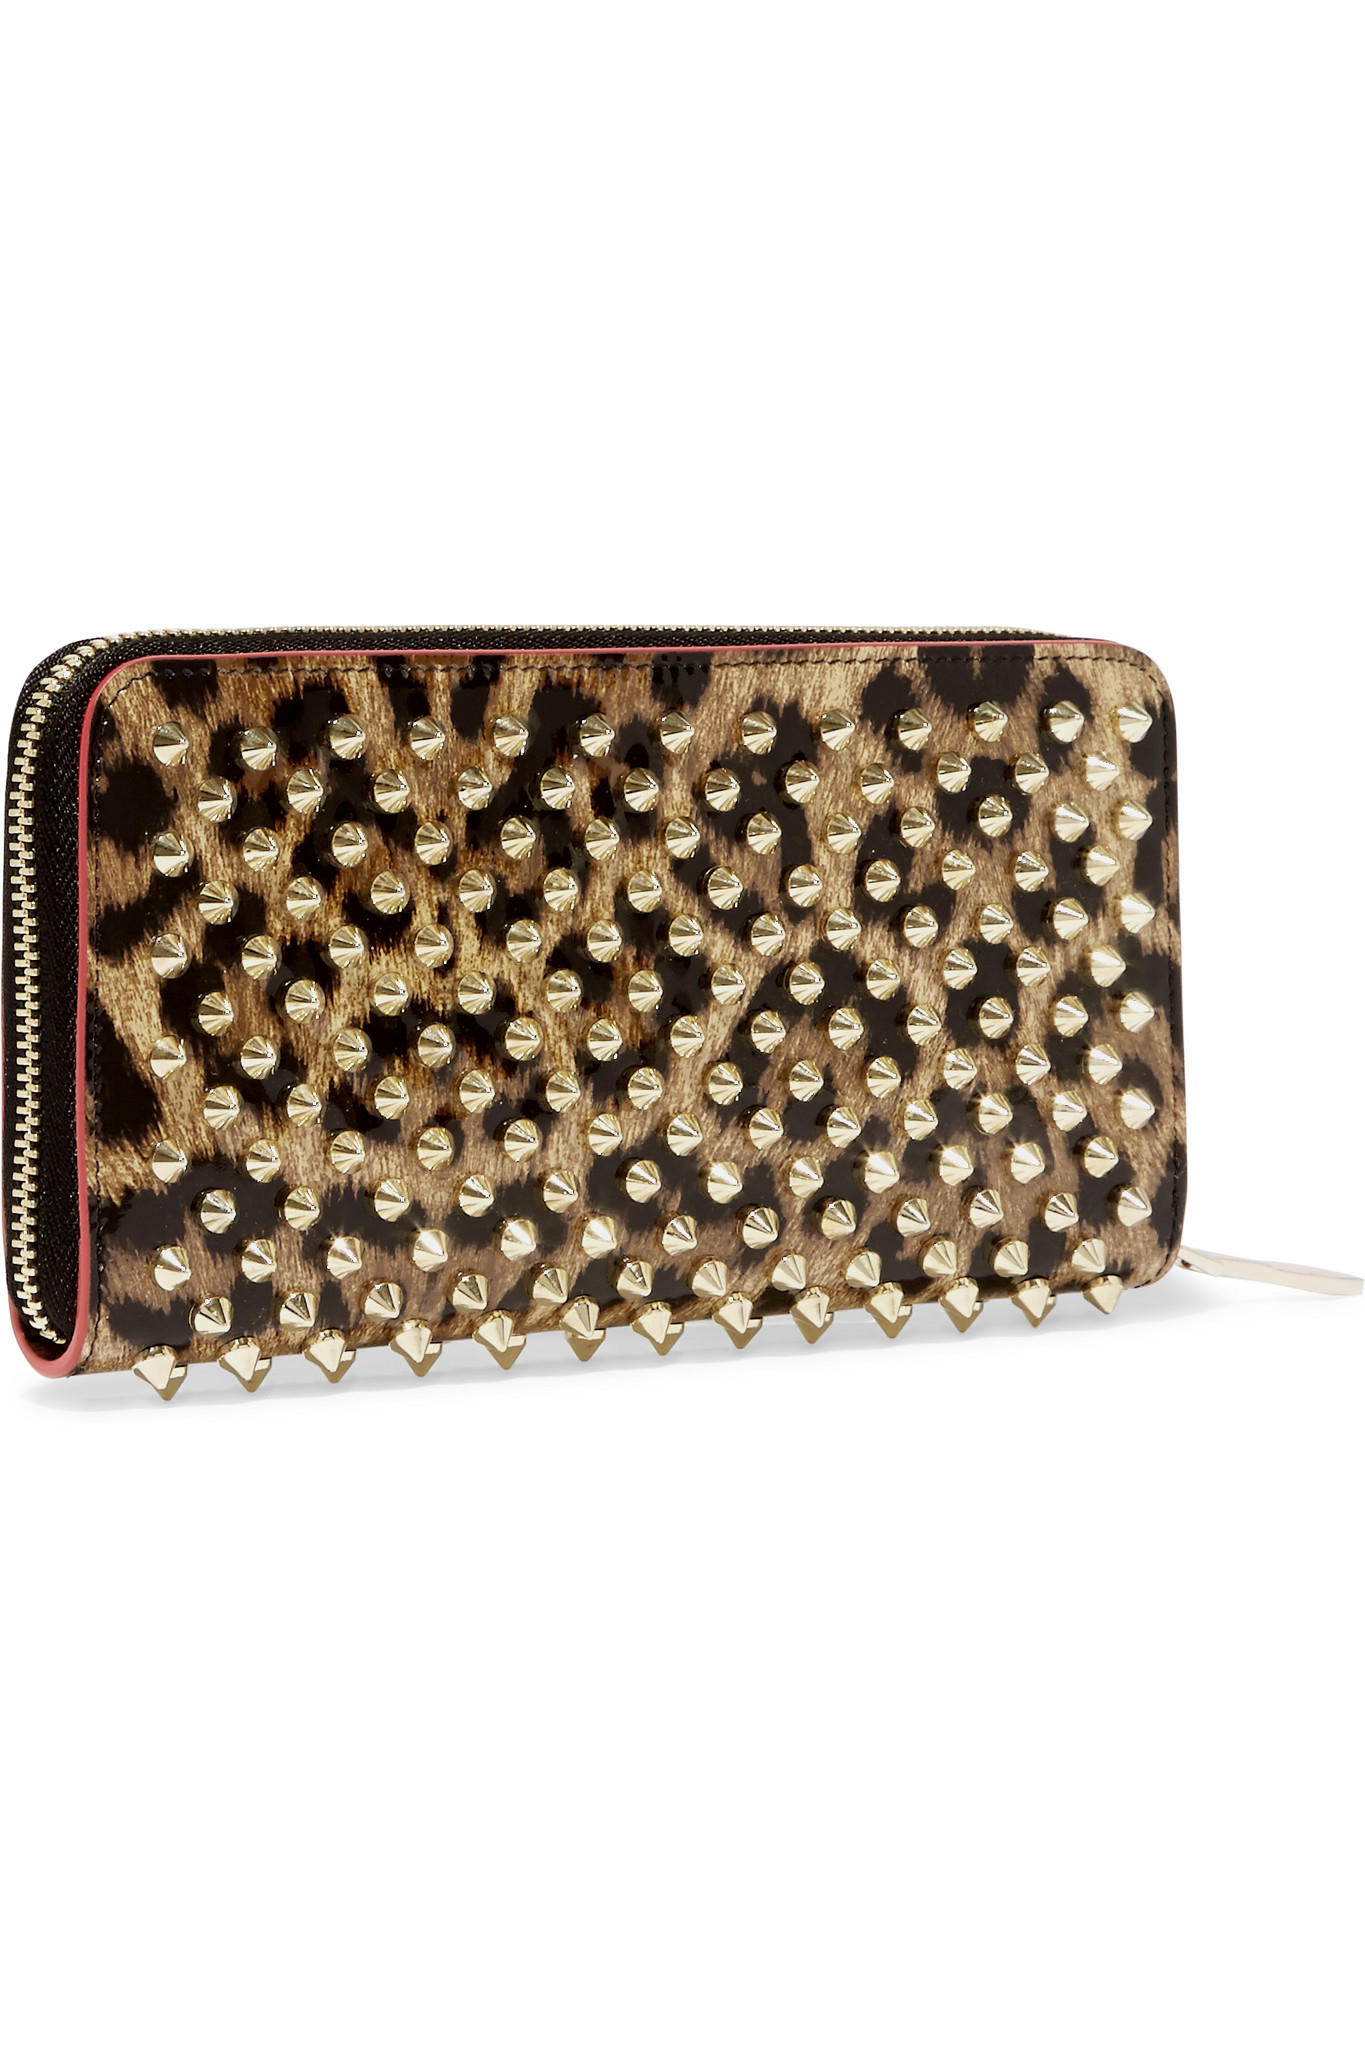 Christian louboutin Panettone Spiked Leopard-print Zip Wallet | Lyst